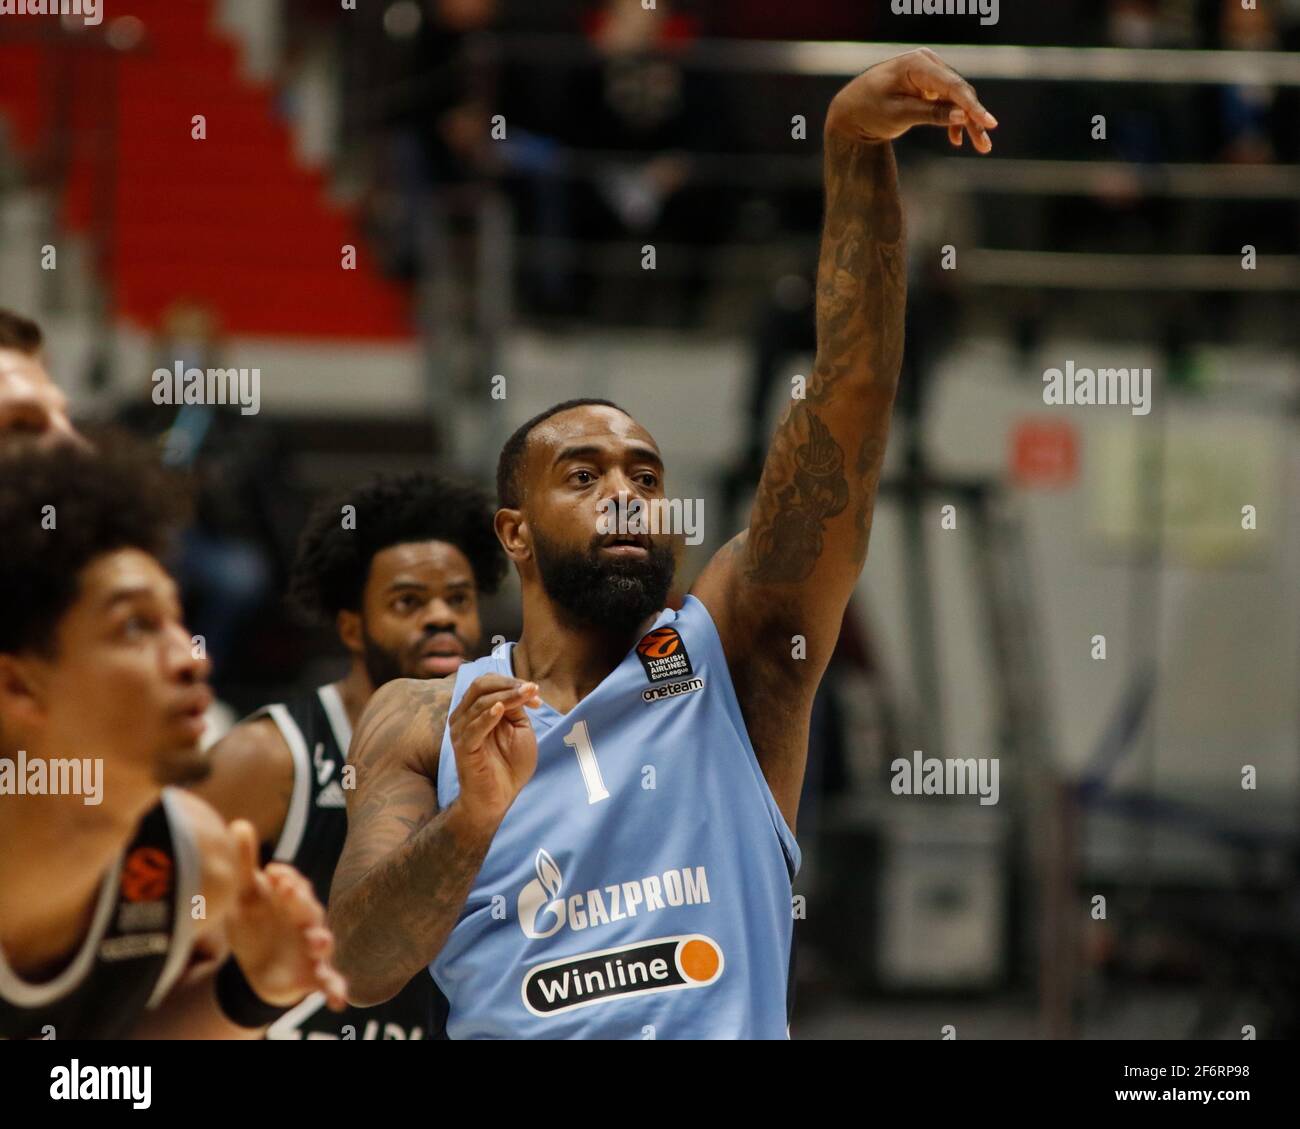 Saint Petersburg, Russia - 2 April 2021: KC Rivers (1) of Zenit are seen in action during the 2020-2021 Turkish Airlines EuroLeague, match between BC ASVEL Villeurbanne and Zenit. Stock Photo